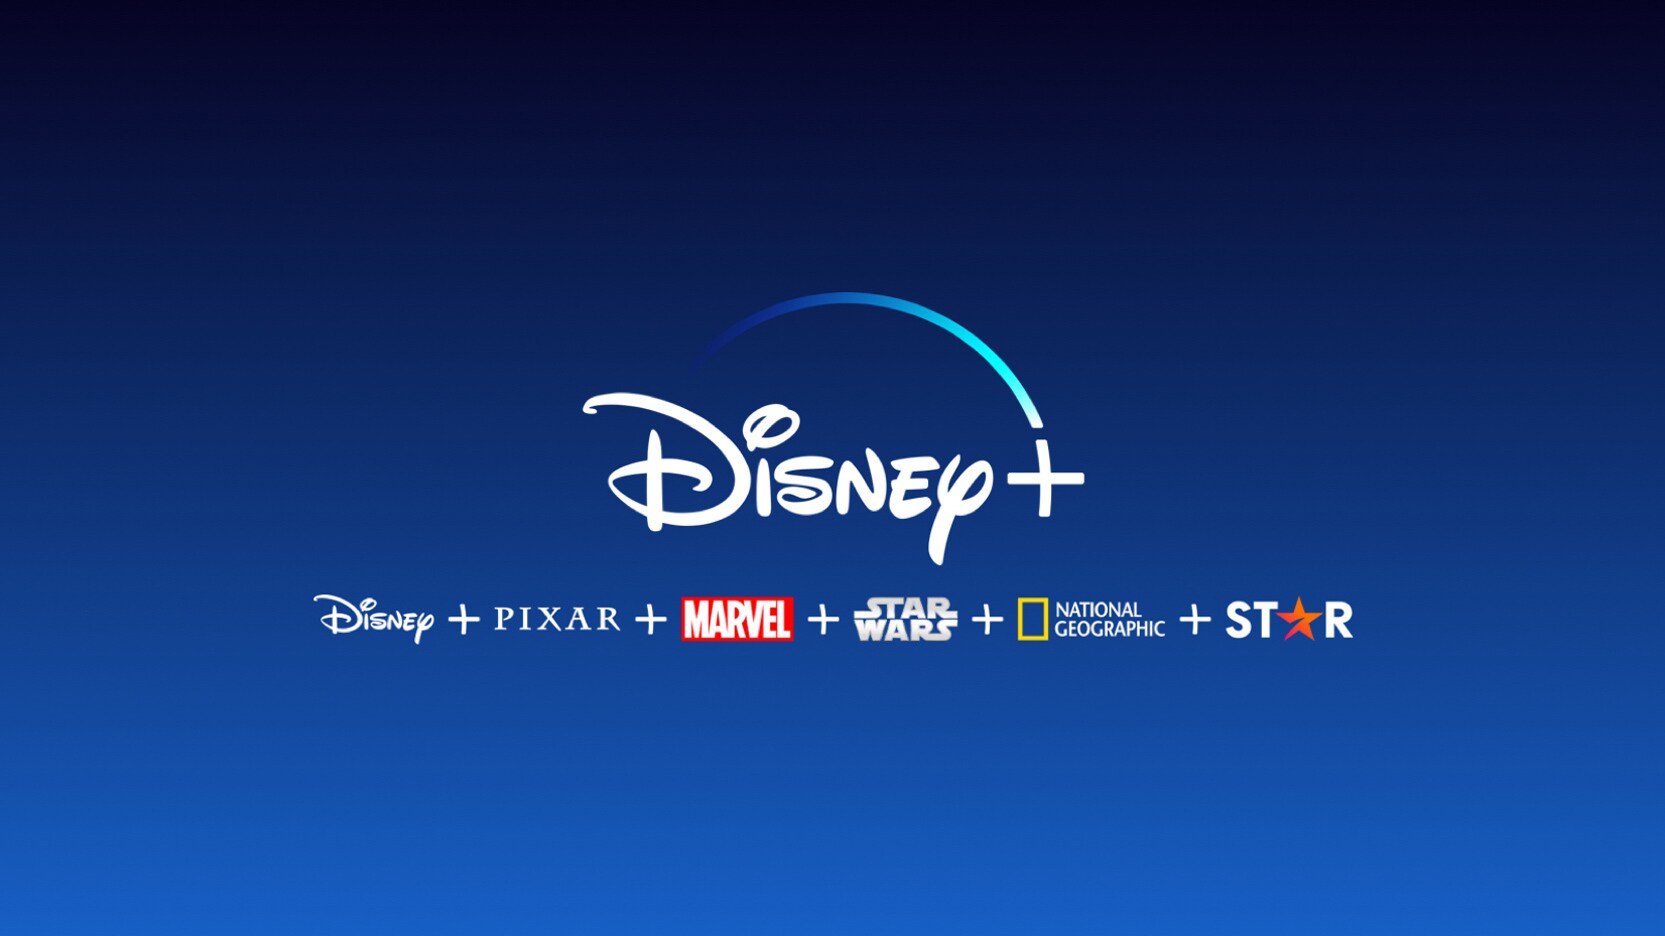 DISNEY LAUNCHES EMEA-WIDE MARKETING CAMPAIGN ‘HOUSE OF DISNEY+’